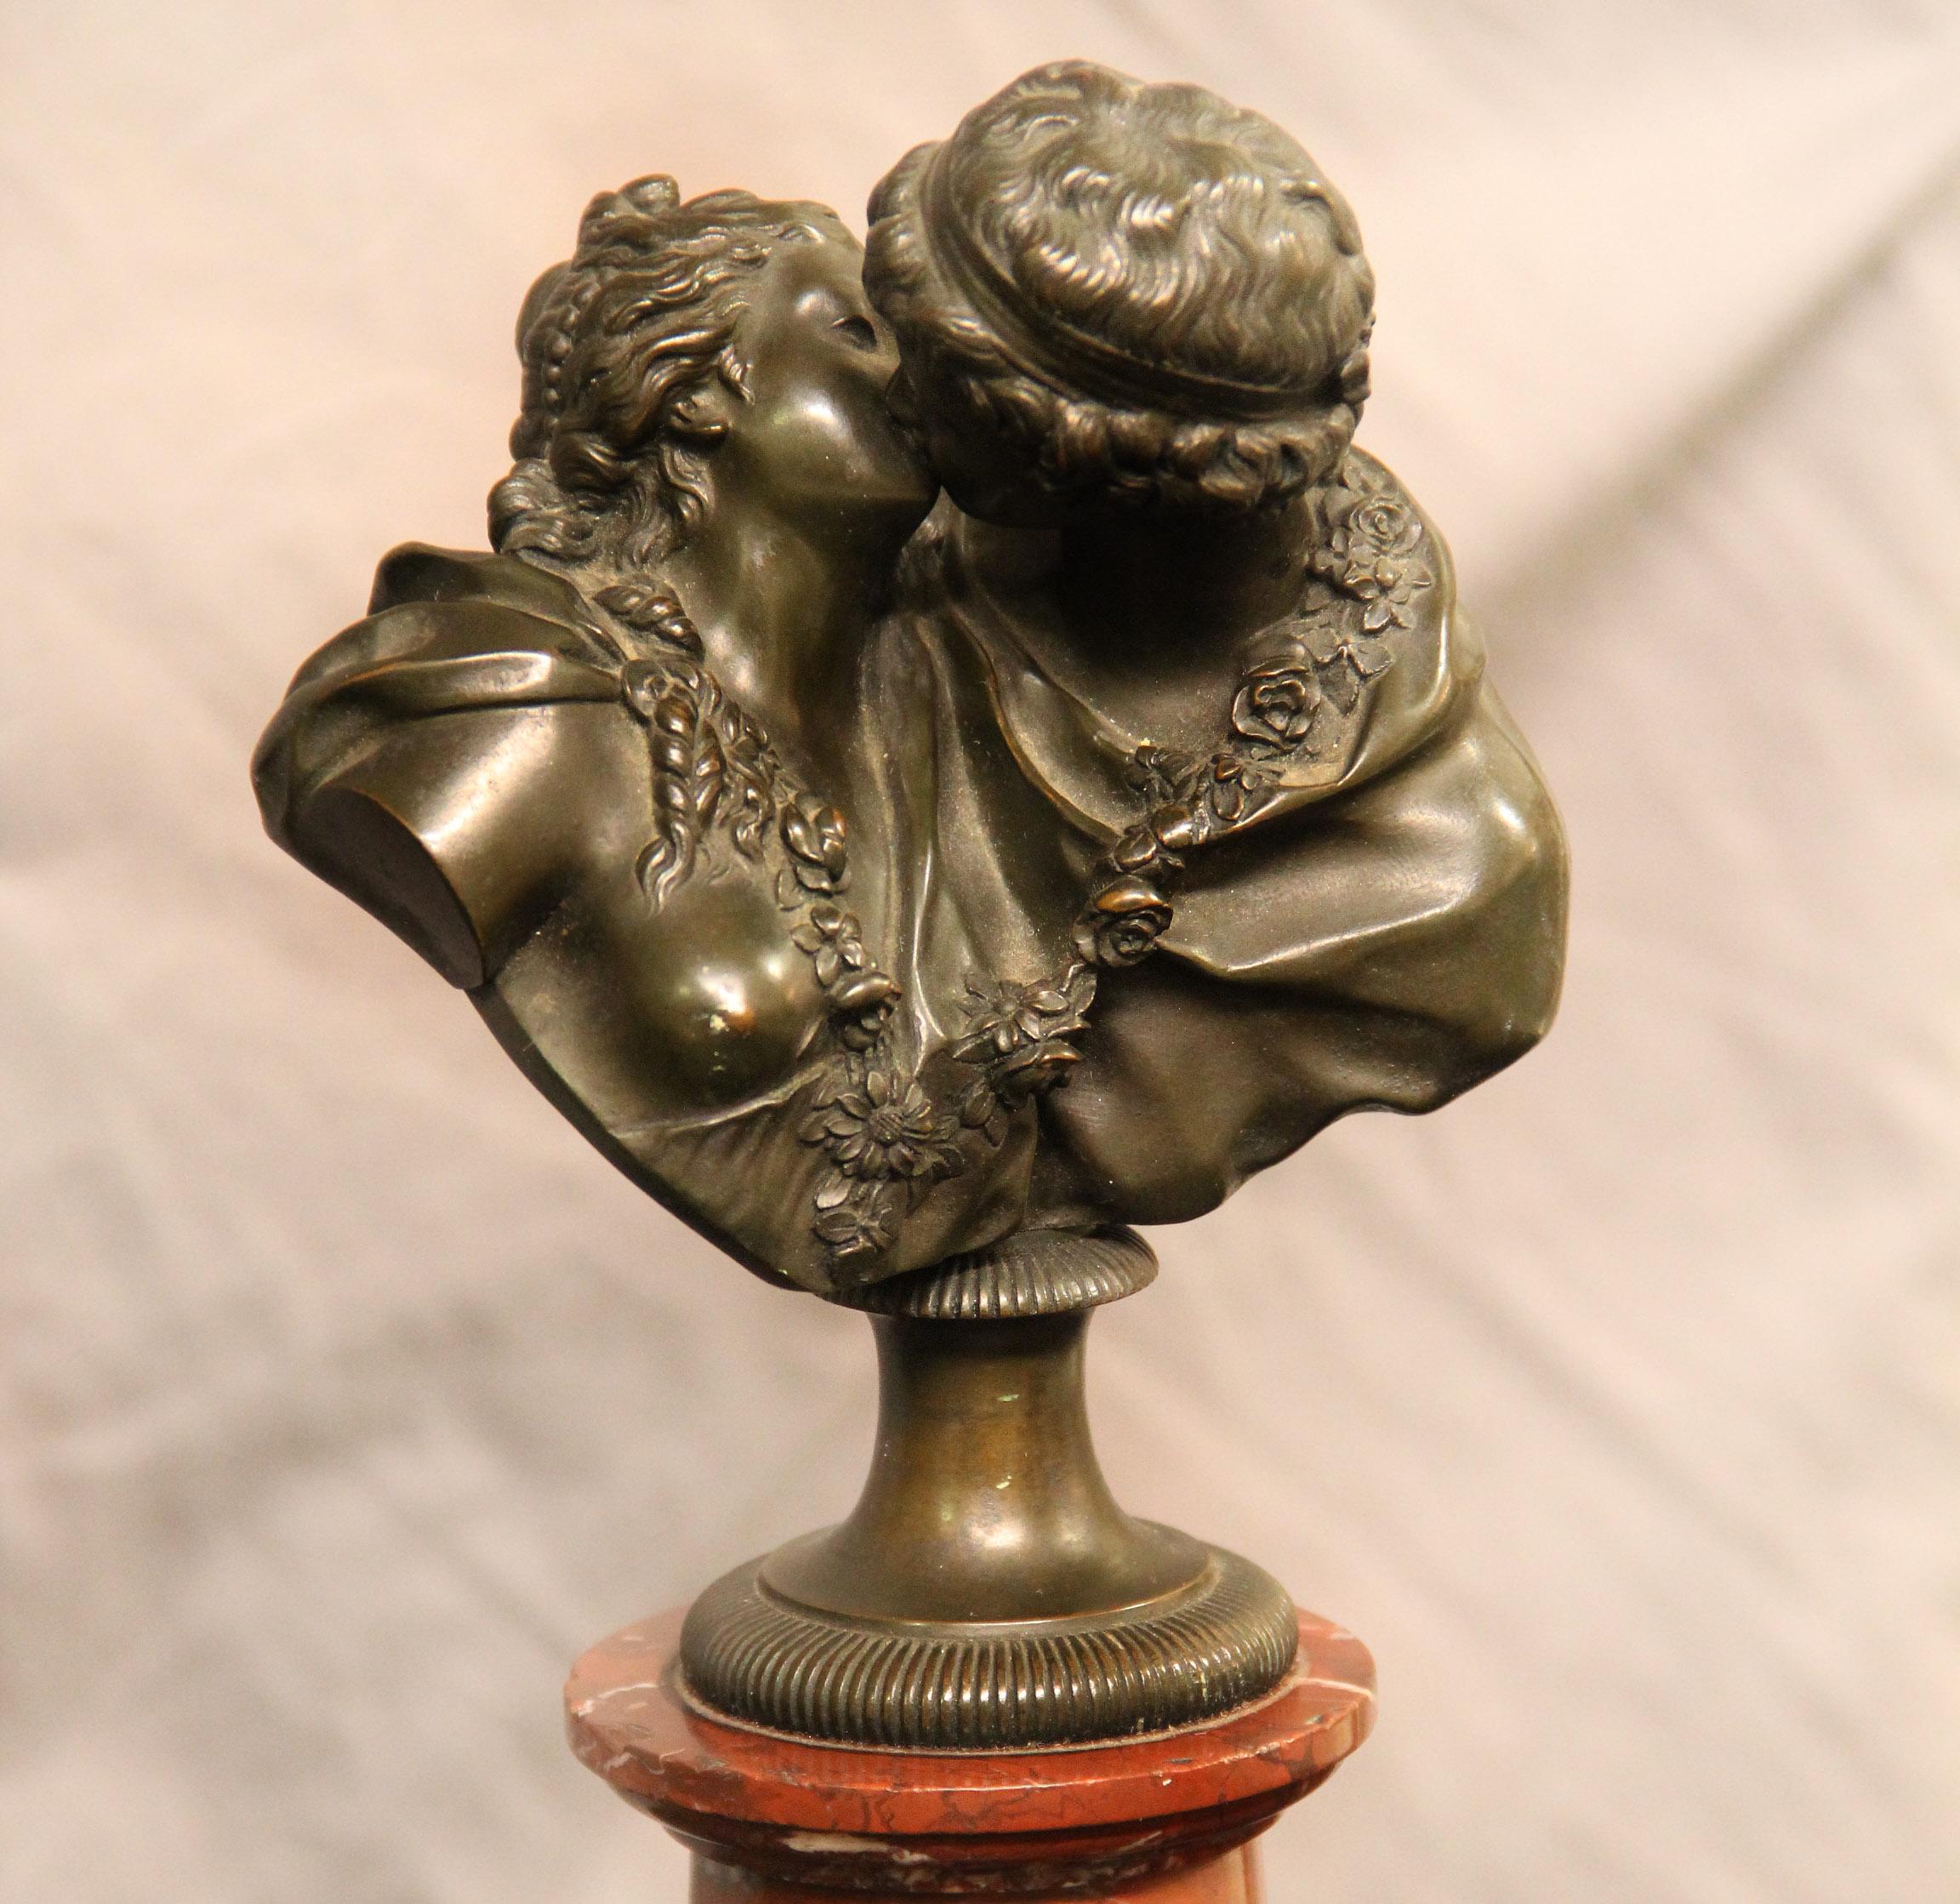 A fine 19th century bronze bust of two lovers entitled “Le Baiser” by Jean- Antoine Houdon

A beautiful bronze sculpture of a kissing couple standing on a red marble base.

Signed Houdon and stamped Susse Feres to the back.

Jean-Antoine